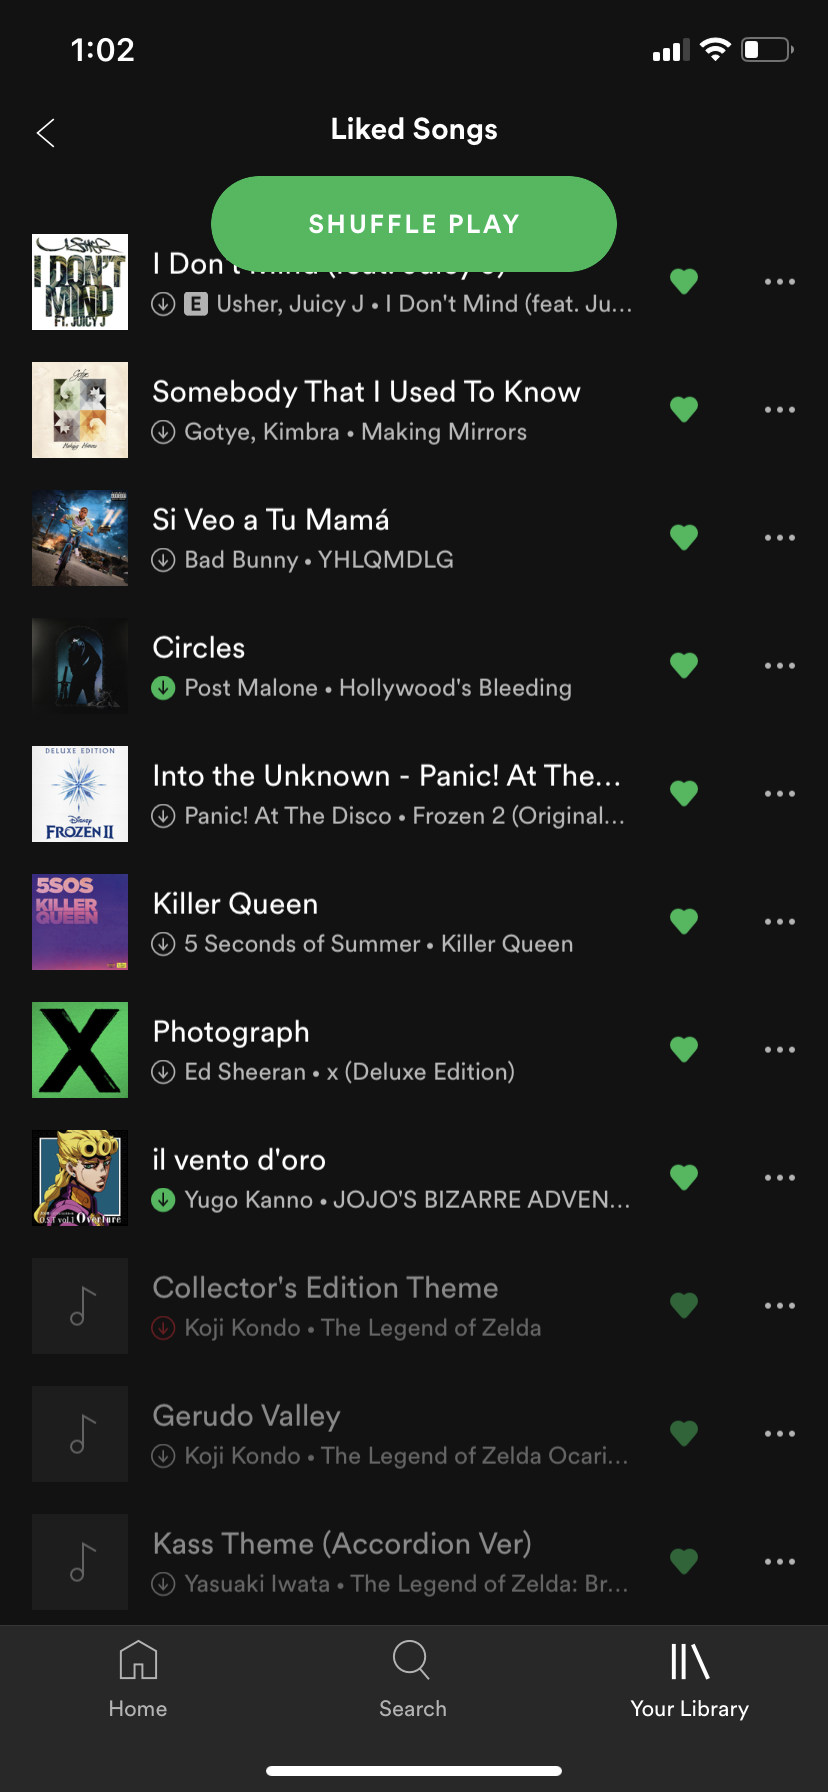 [Desktop] Local Files appearing in Liked Songs - The Spotify Community